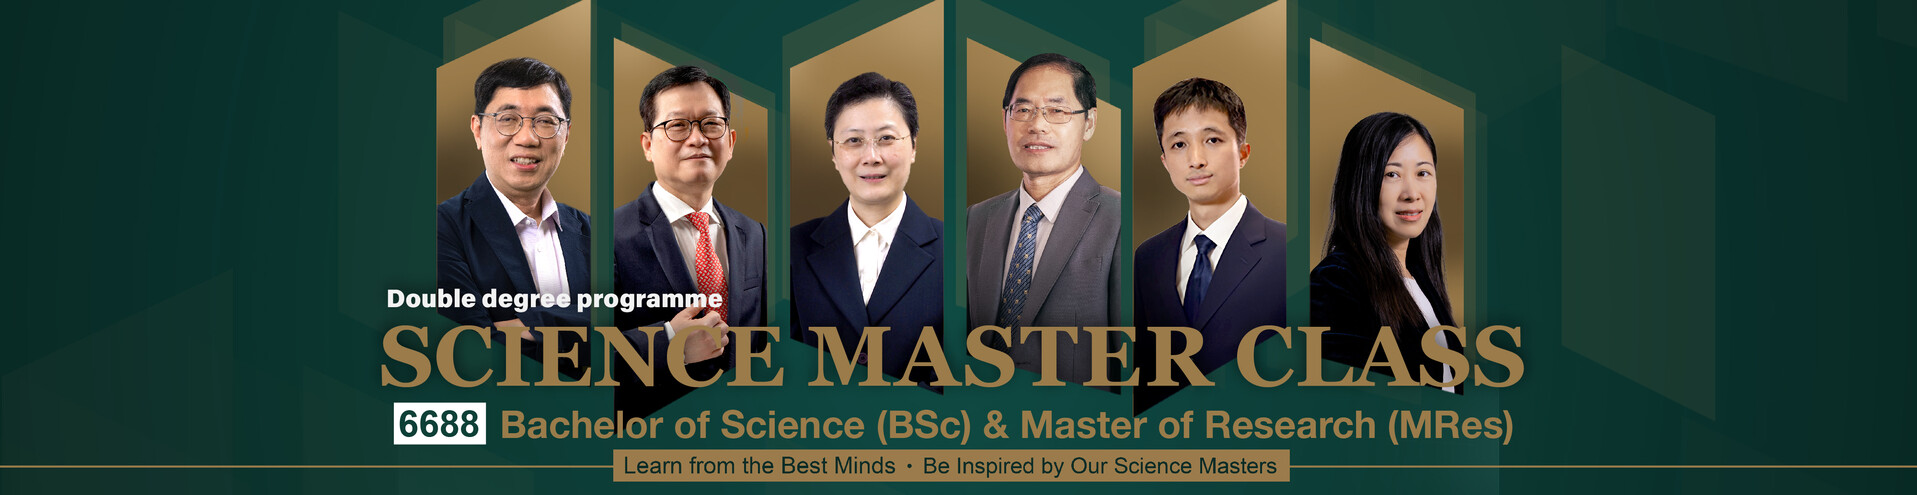 6688 Science Master Class